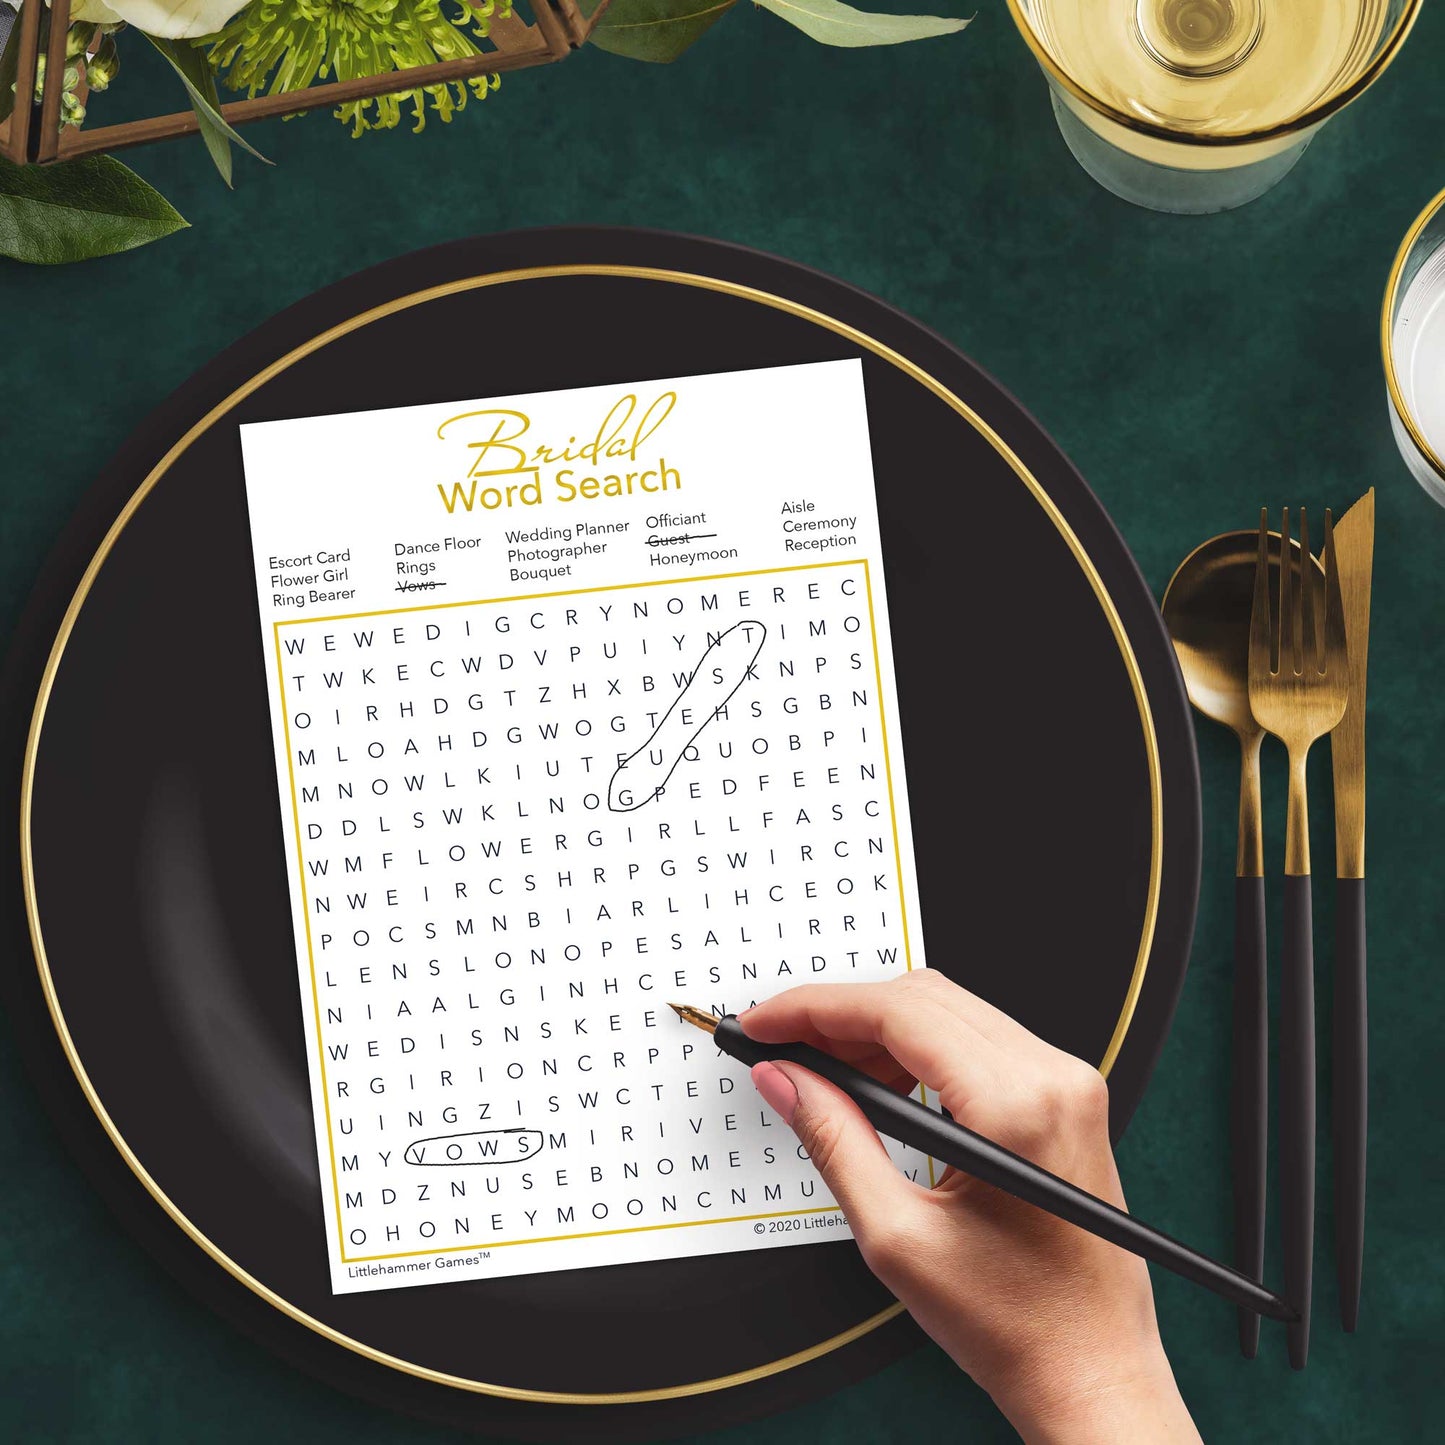 Woman with a pen playing a gold and white Bridal Word Search game card at a dark place setting